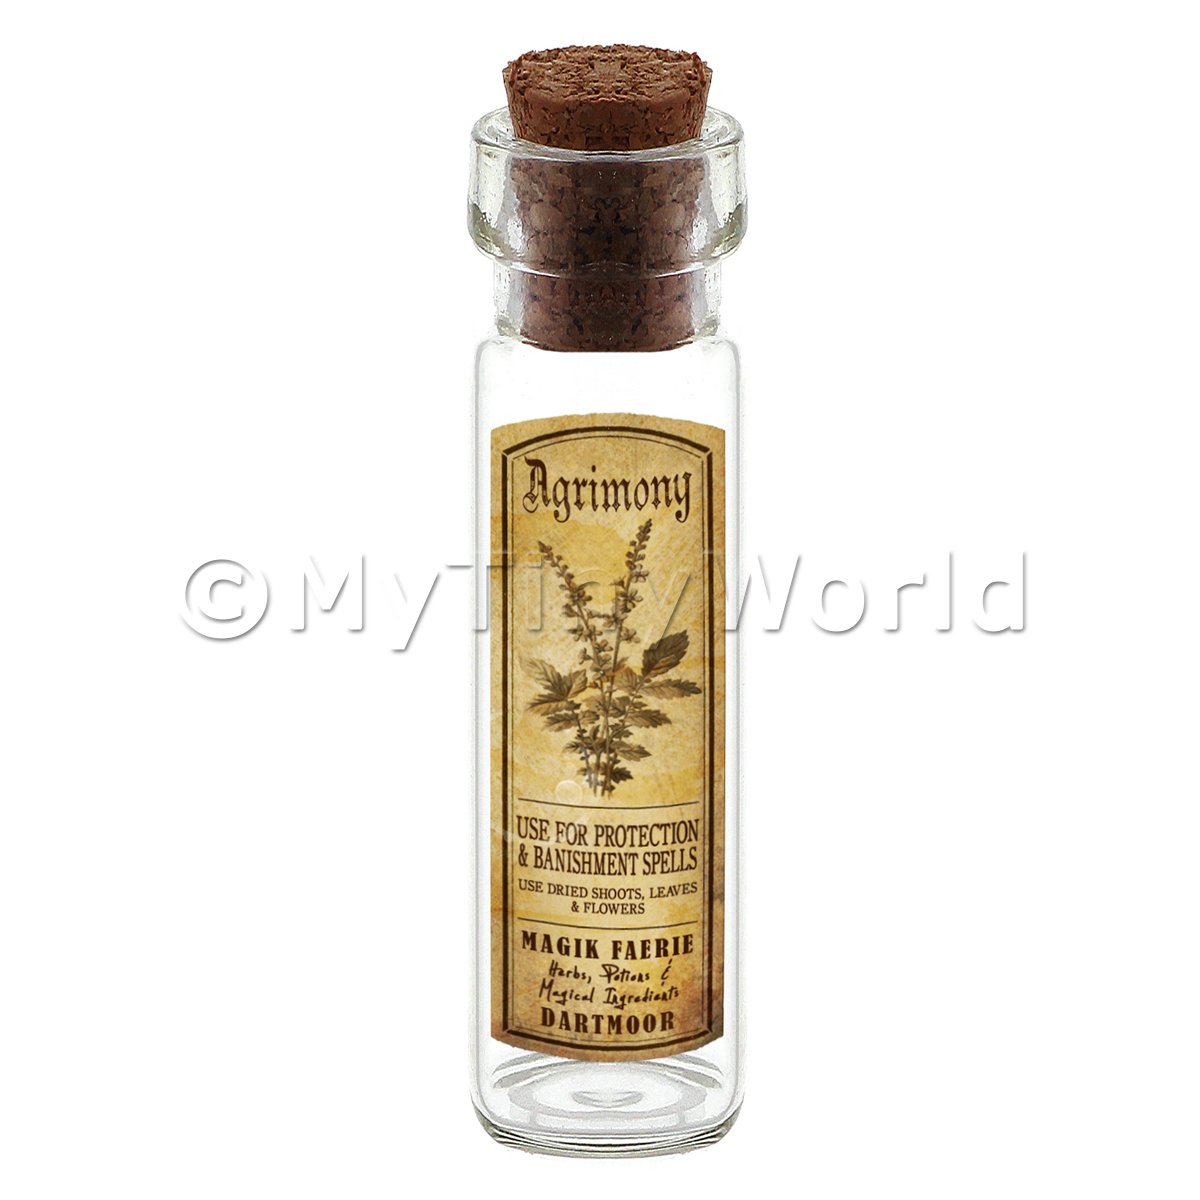 Dolls House Apothecary Long Herb Sepia Label And Bottle Set 8 